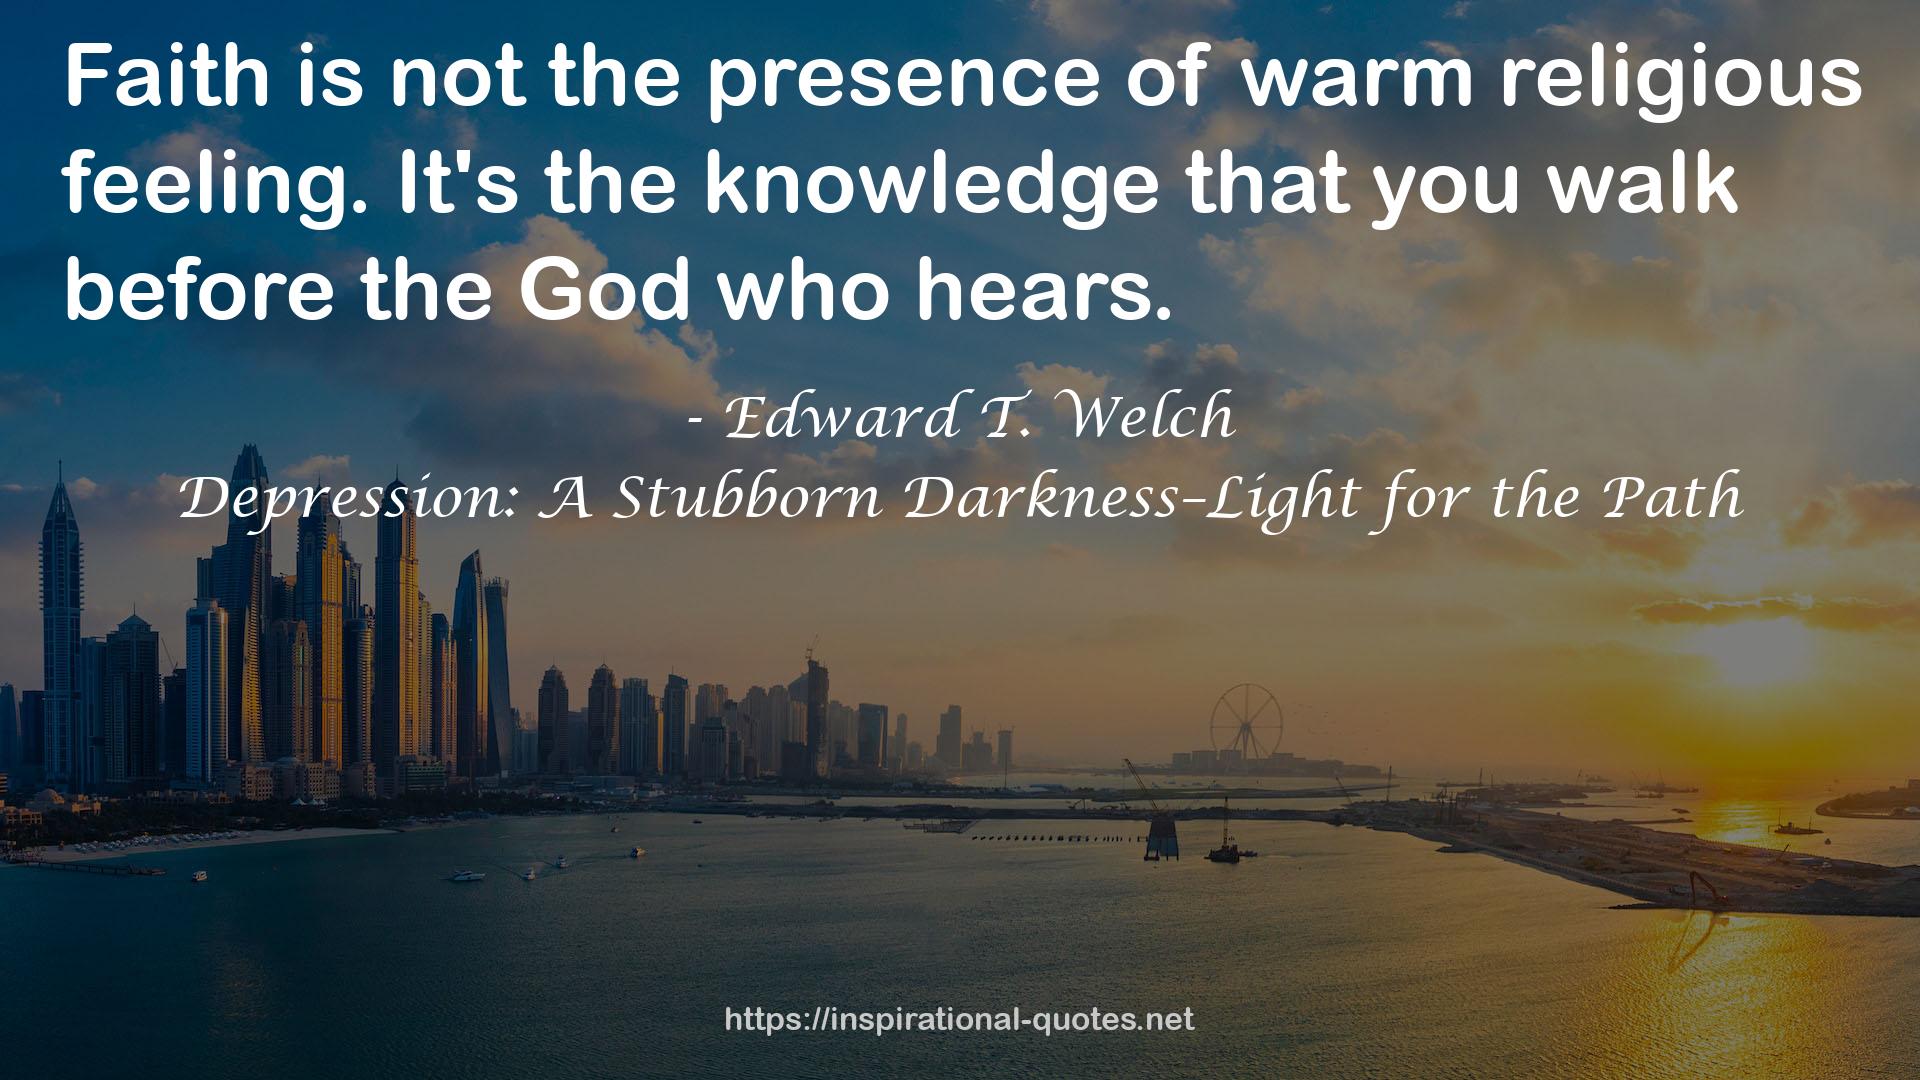 Edward T. Welch QUOTES